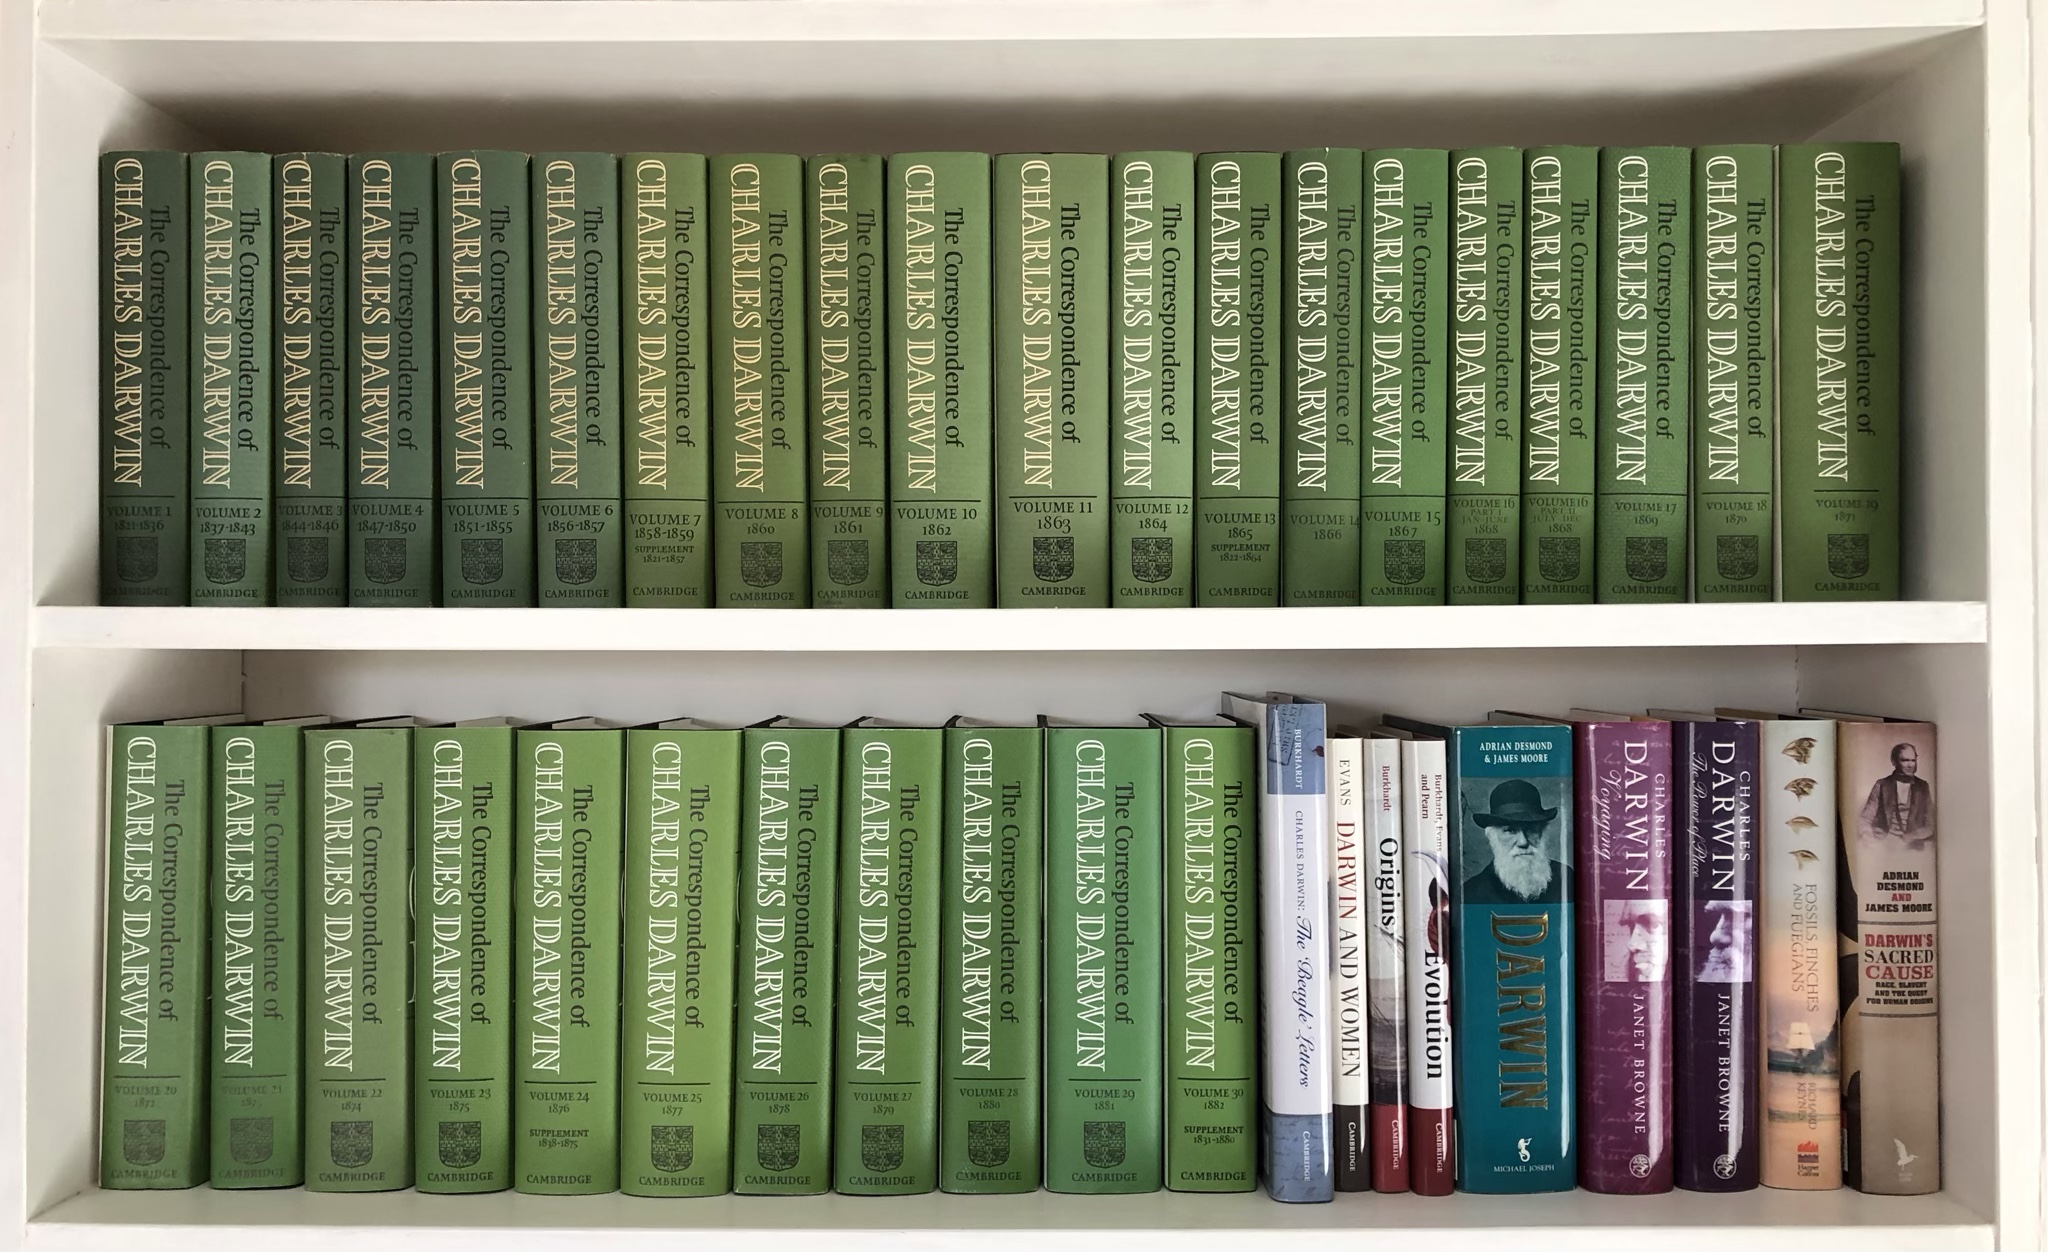 The full 30-volume (31-book) set of the Correspondence of Charles Darwin.